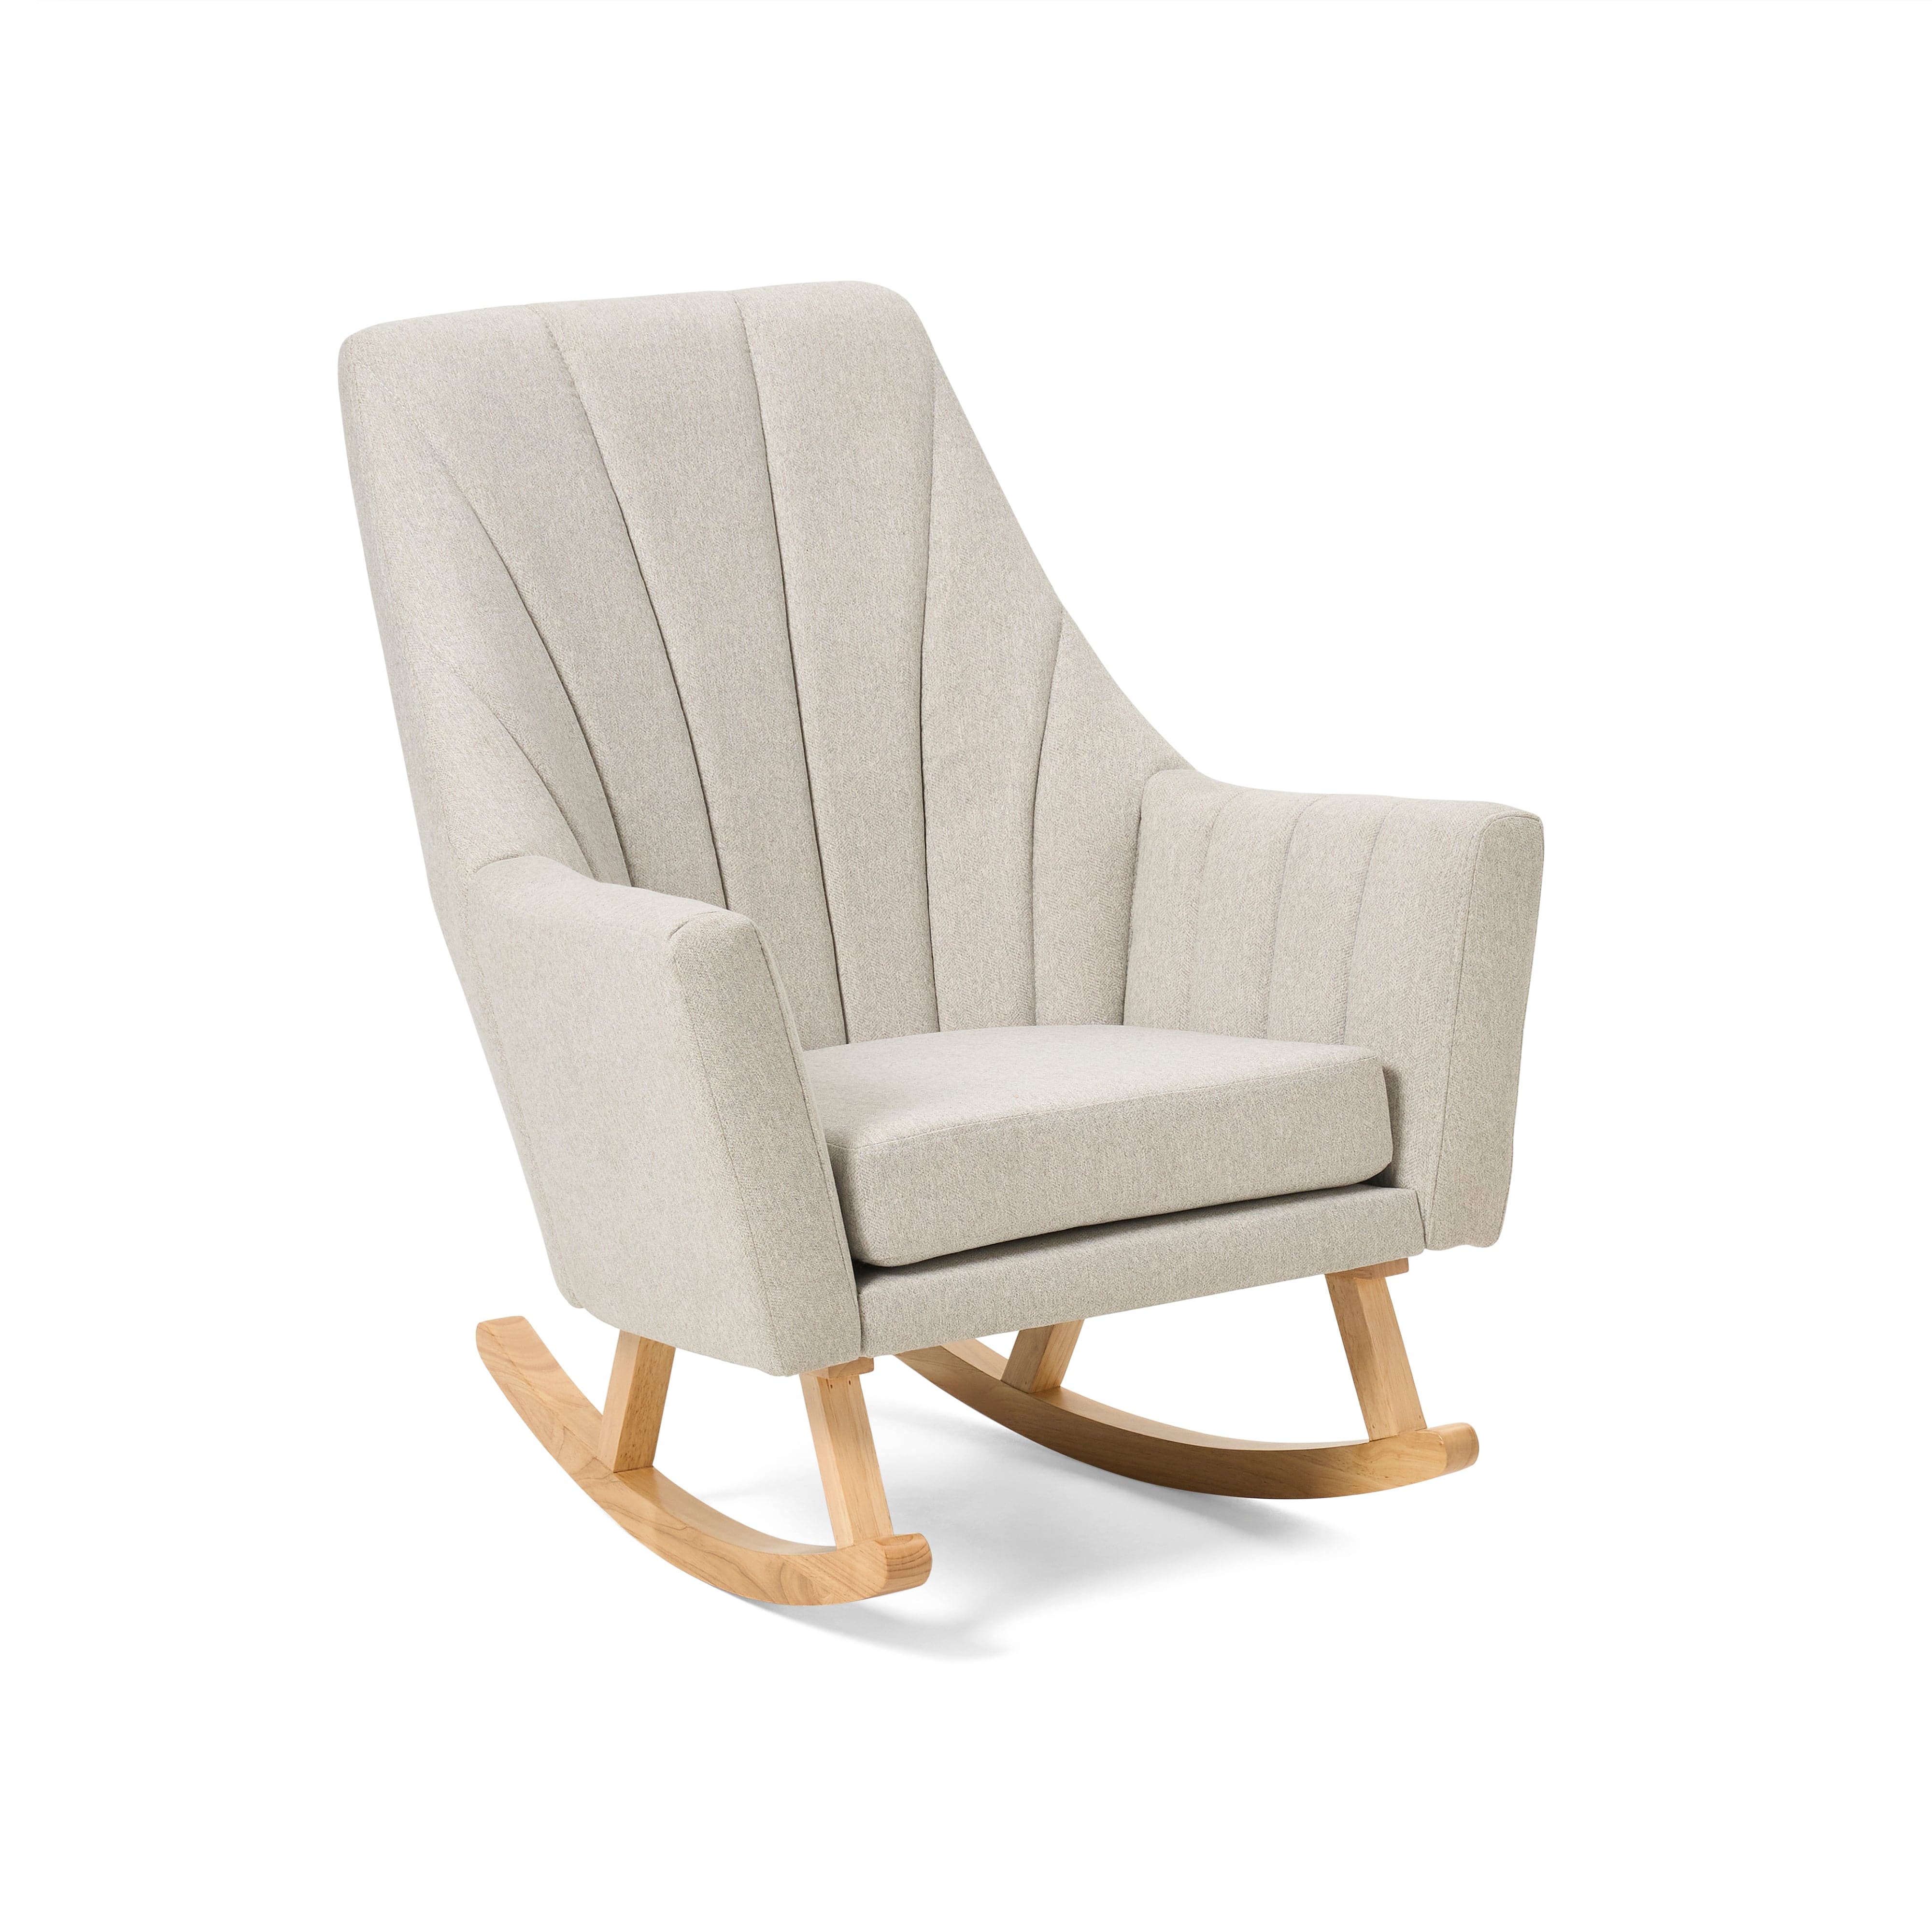 Tutti Bambini Jonah Rocking Chair & Foot Stool - Pebble - For Your Little One